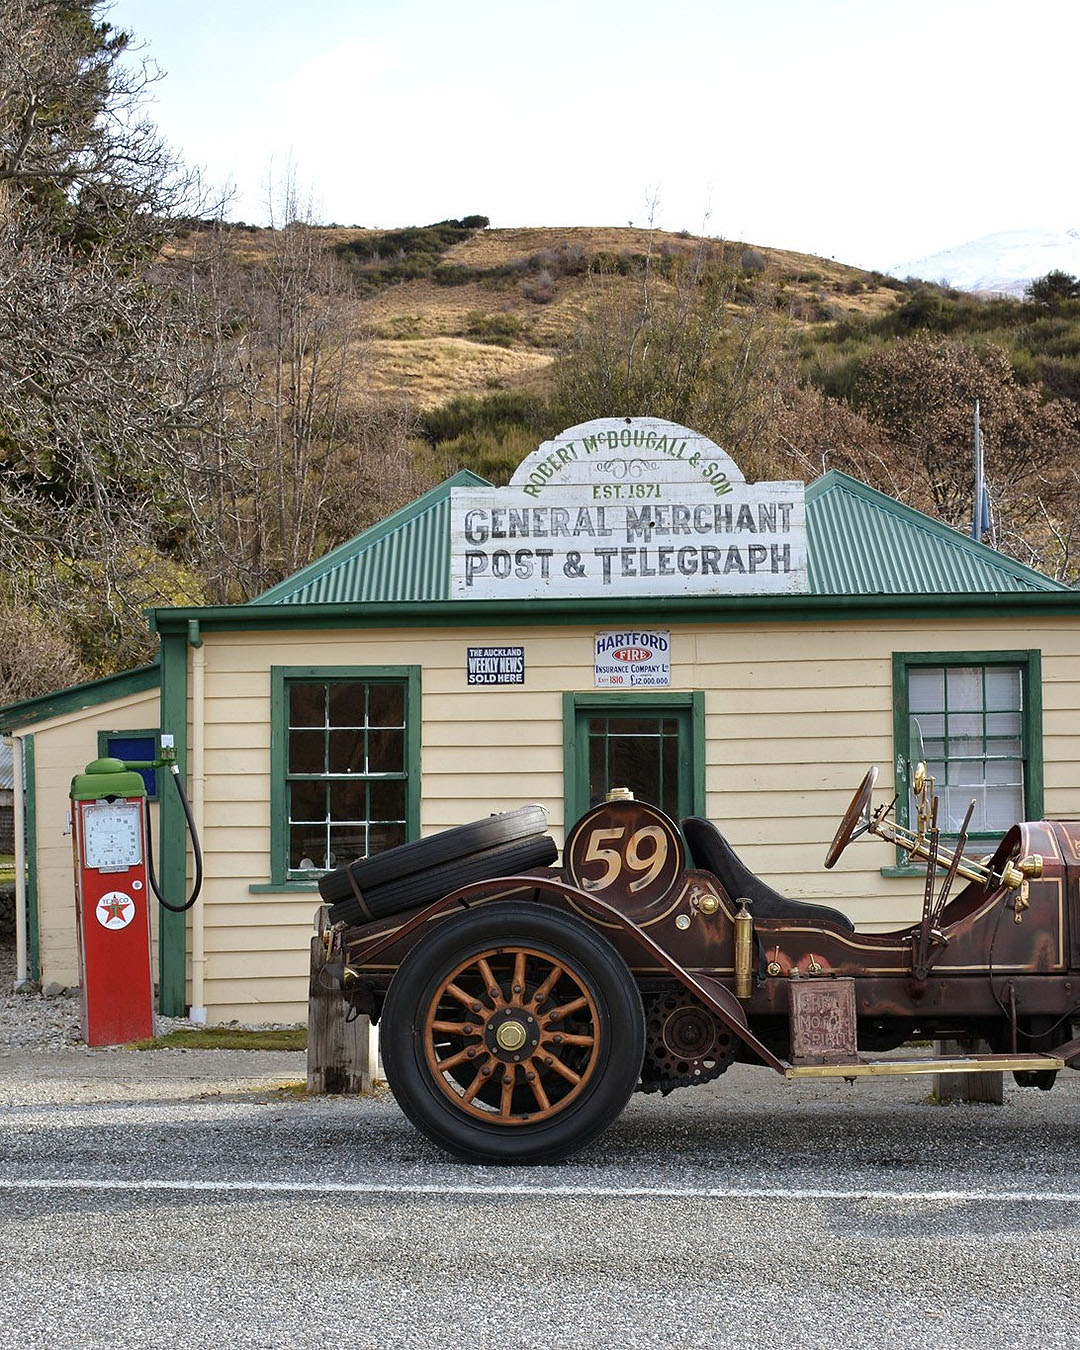 A vintage car in front of an old fashioned post and telegraph shop.